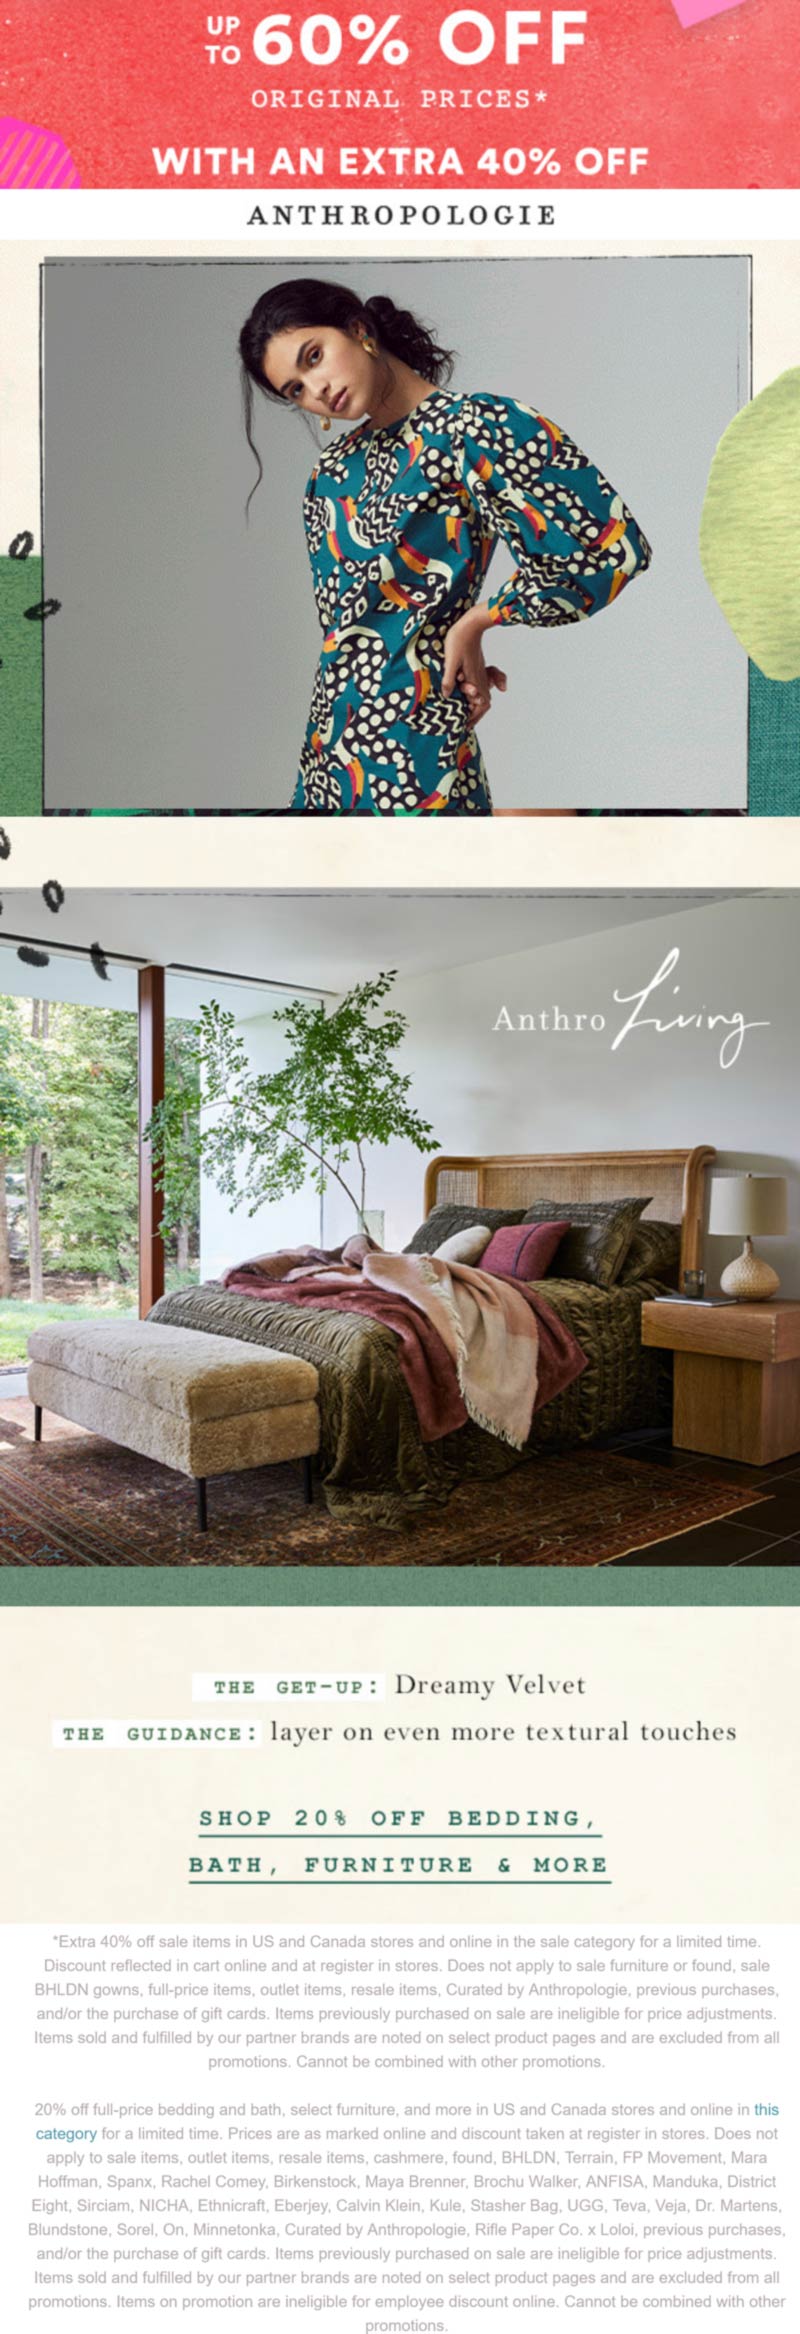 Extra 40 off sale items & more at Anthropologie, ditto online 